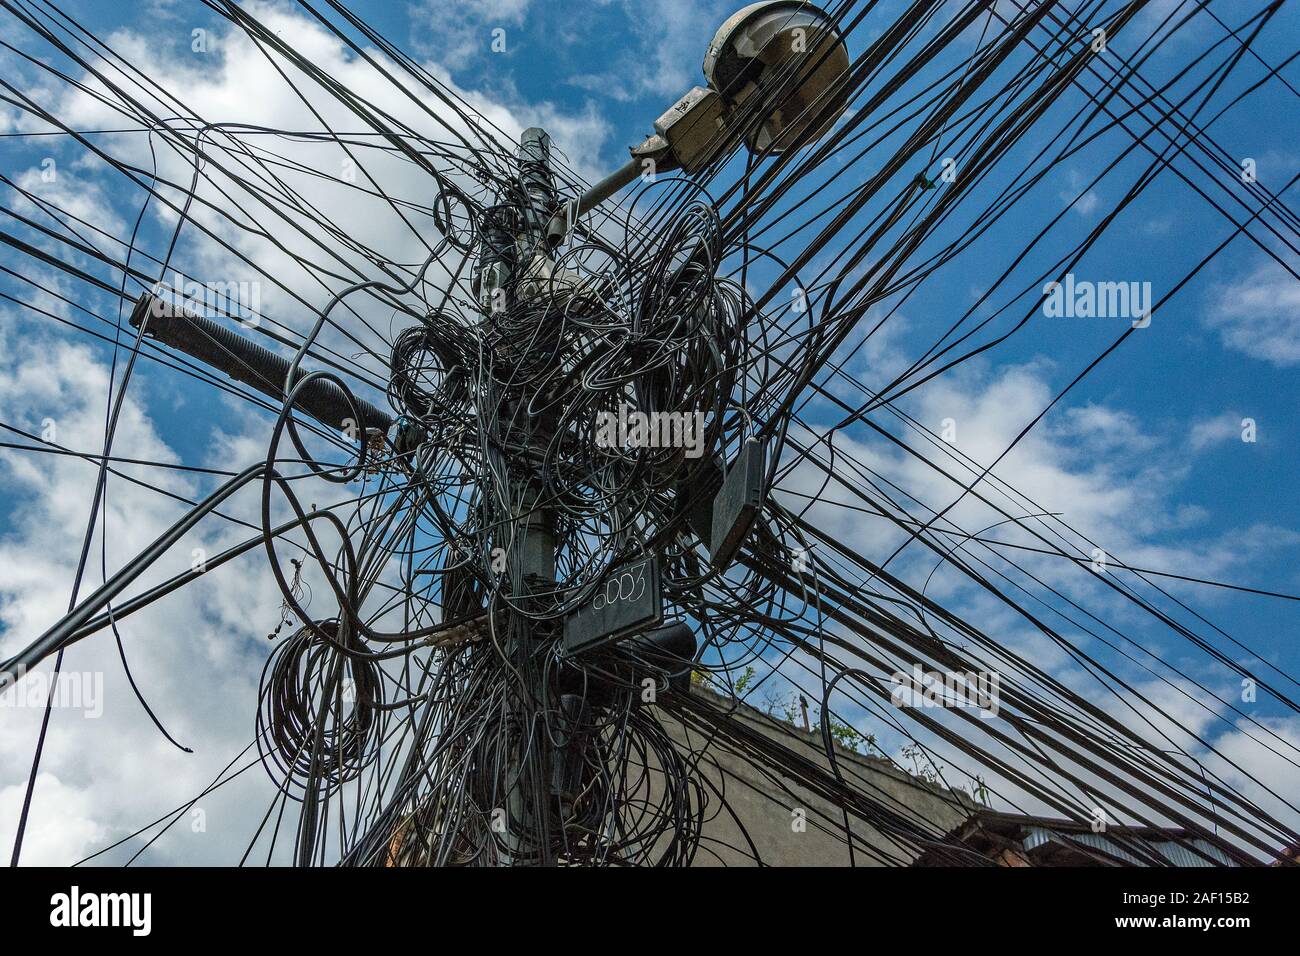 A Gordian Knot tangle of wires. Stock Photo